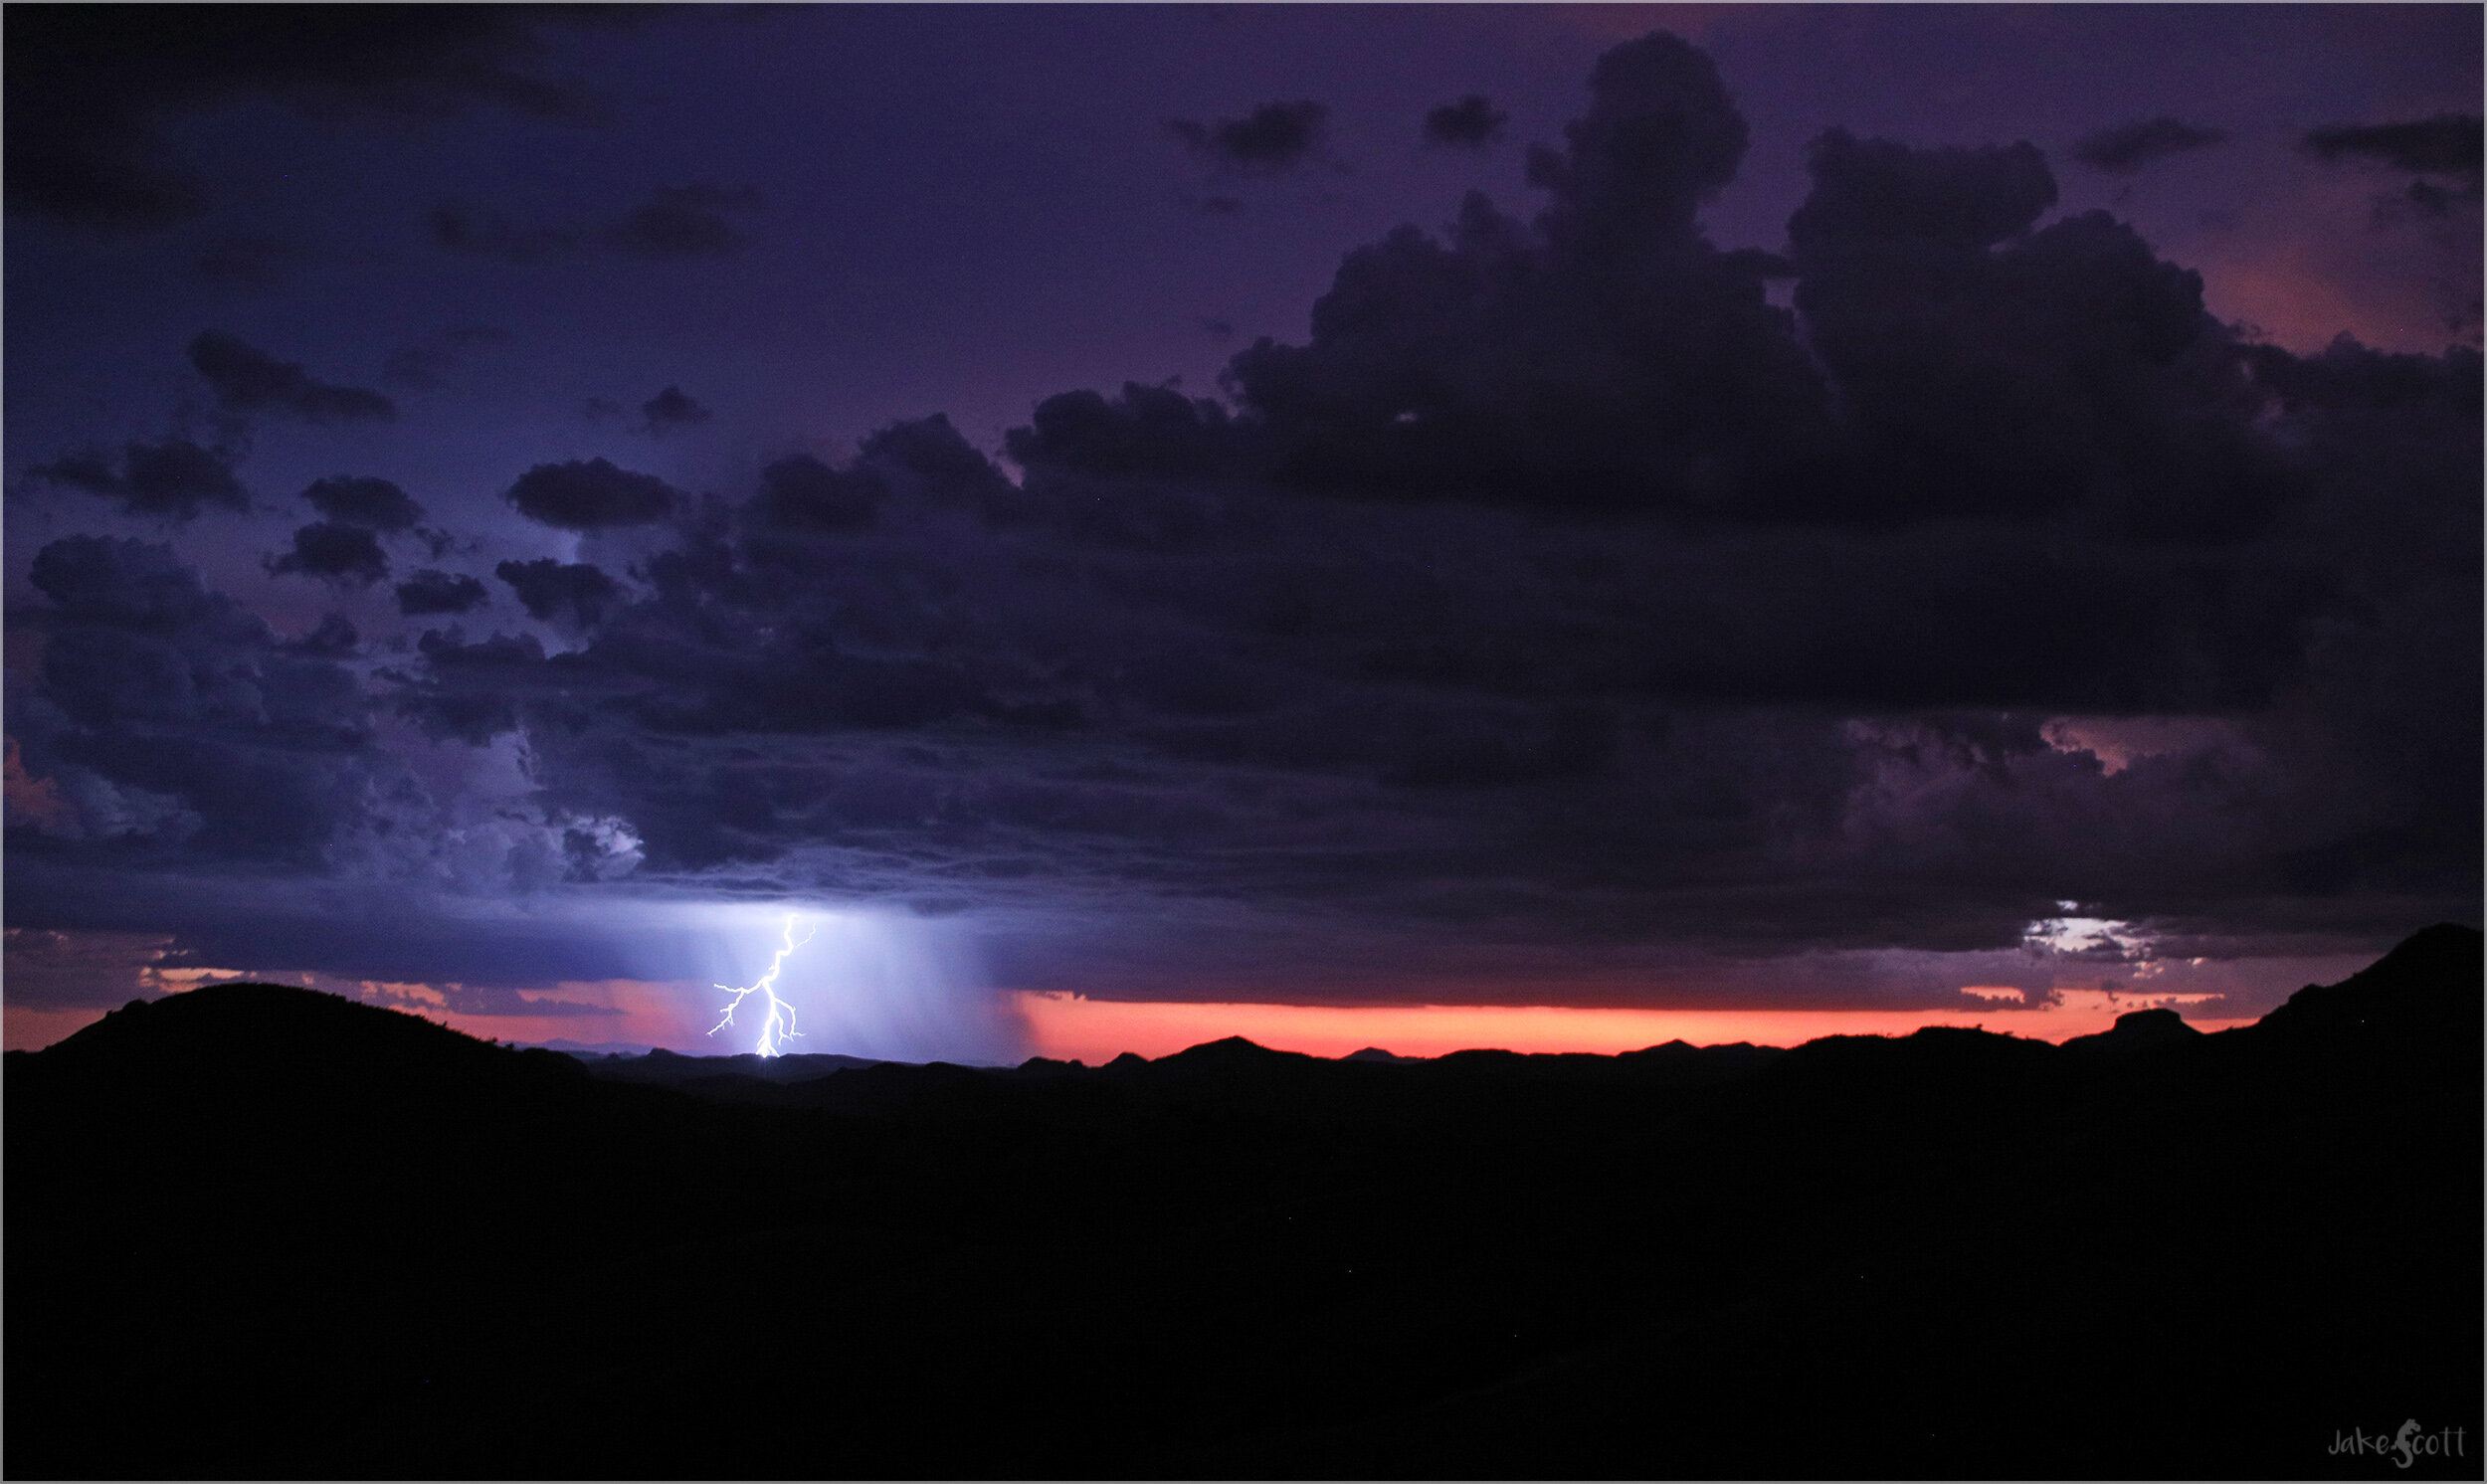  Lightning strikes from thunderstorm over Mexico from my viewpoint in southern Arizona. 